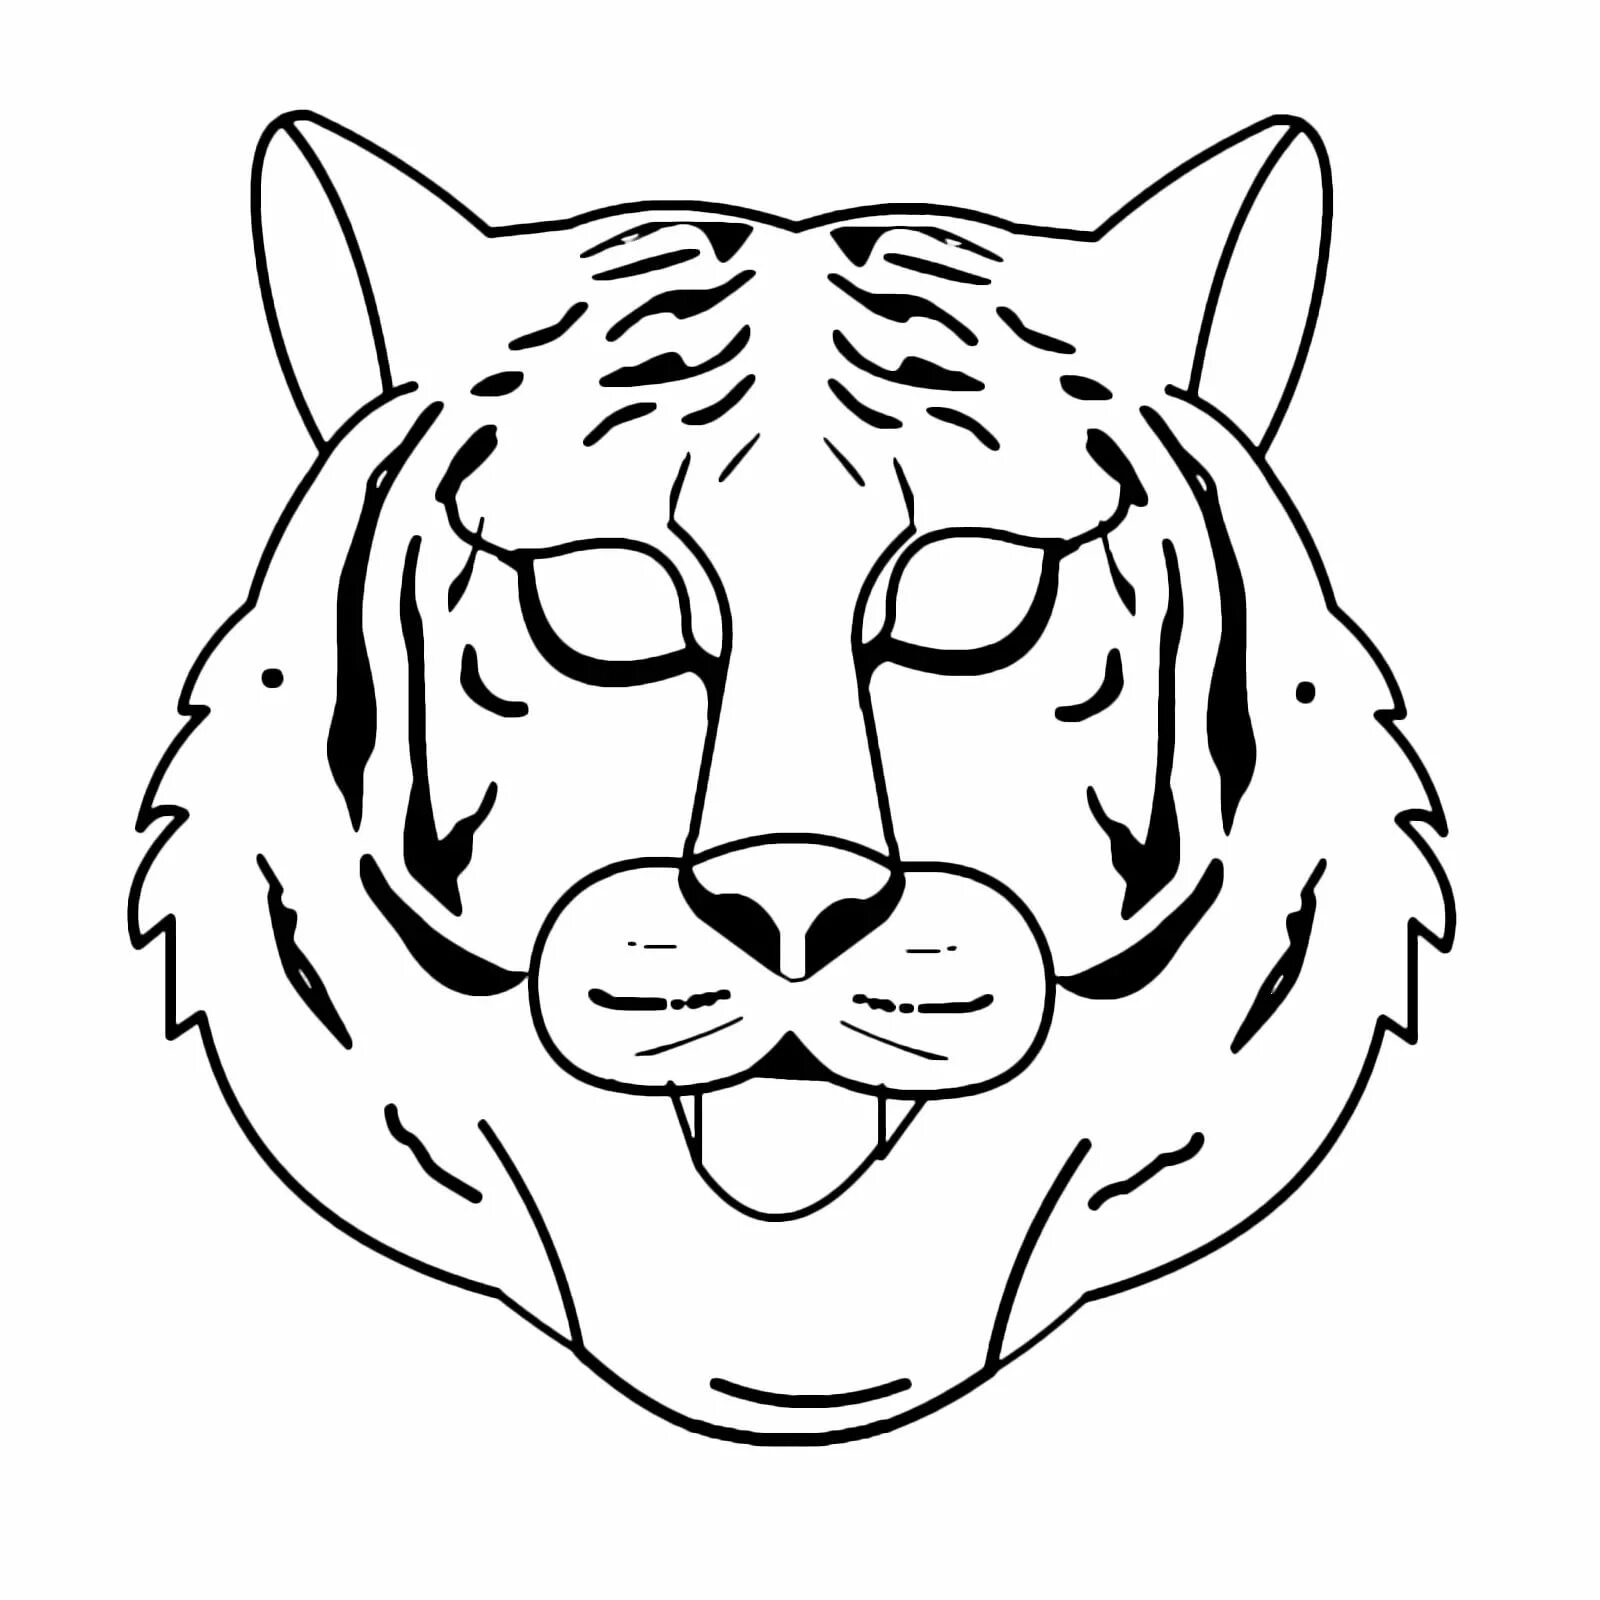 Tiger mask coloring page